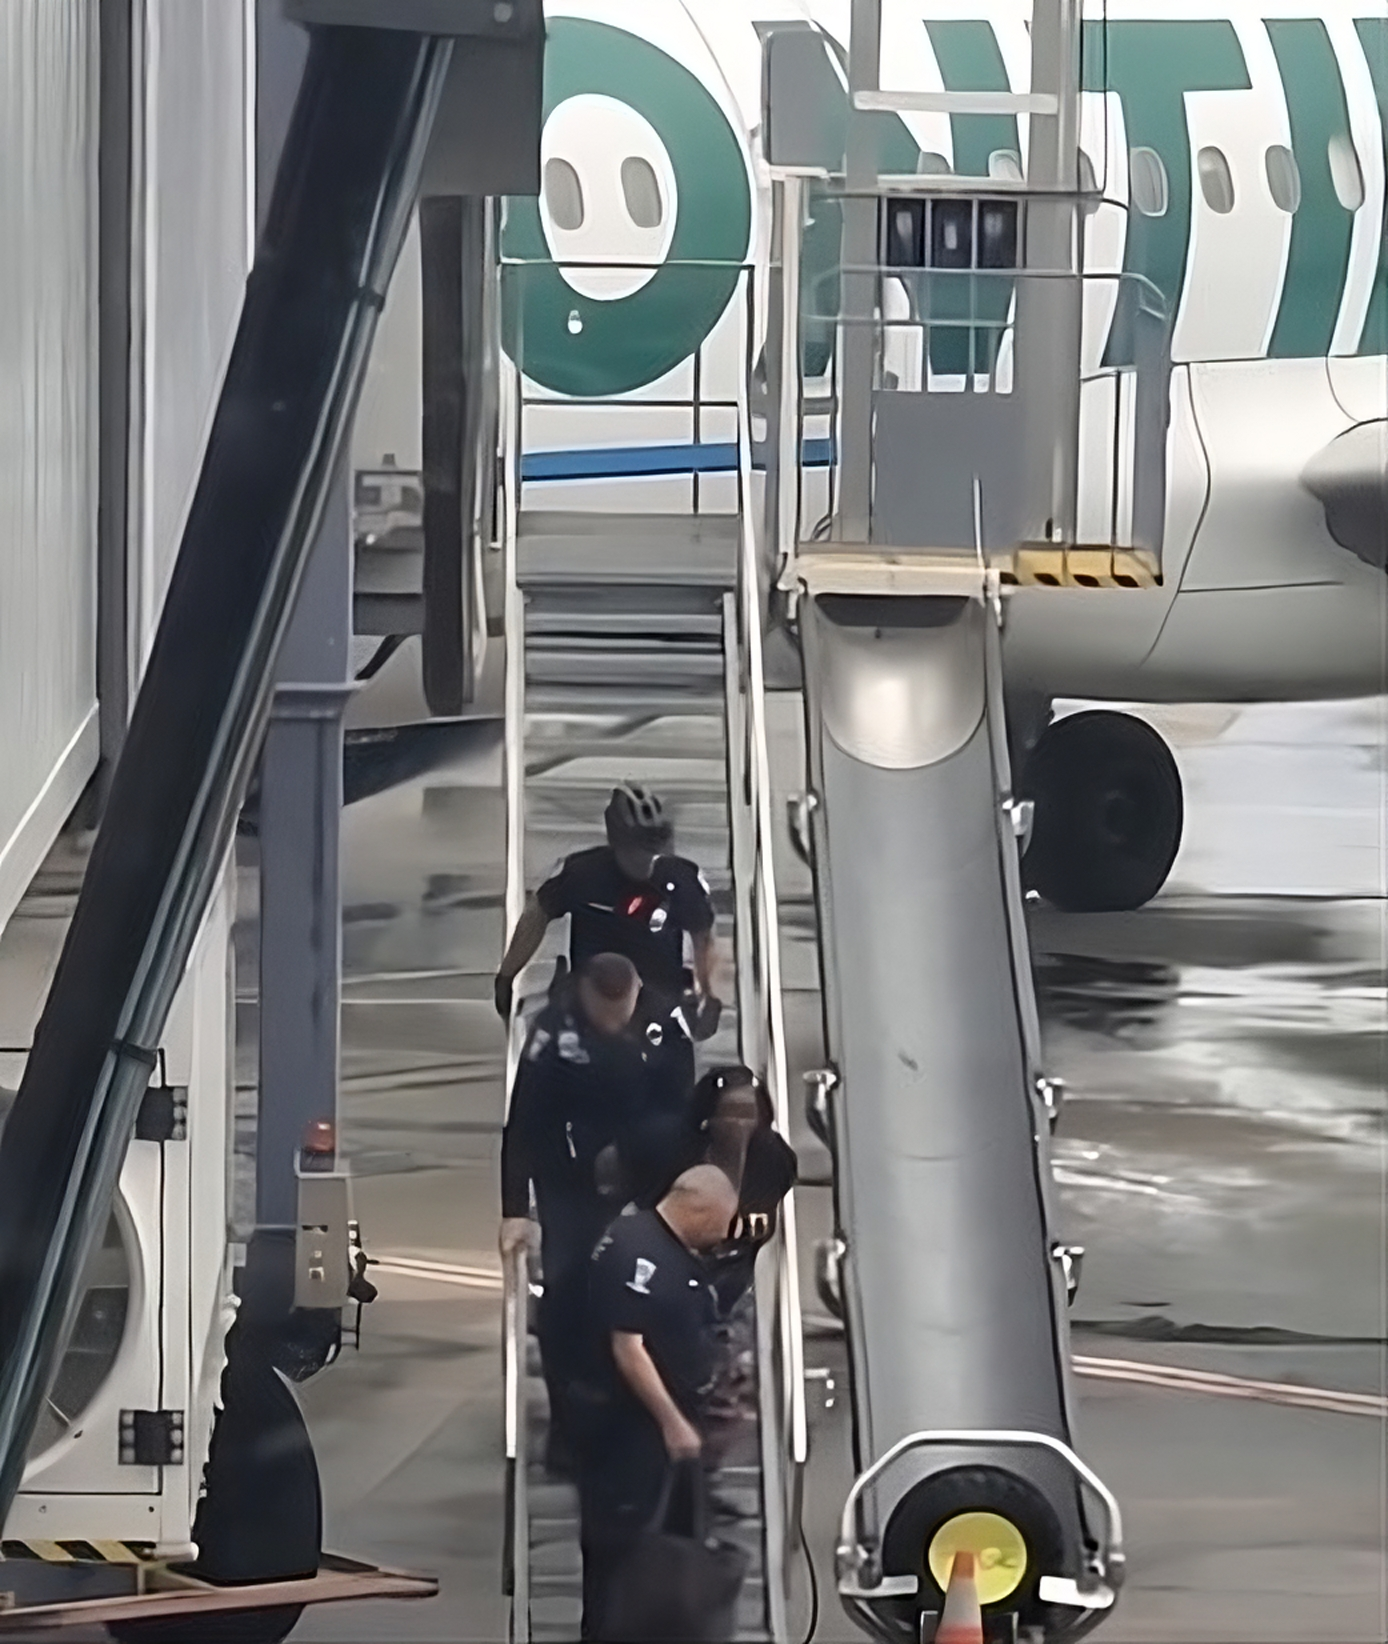 Viral Arrest Video: Exit Row Passenger Handcuffed For Refusing To Assist Crew In An Emergency